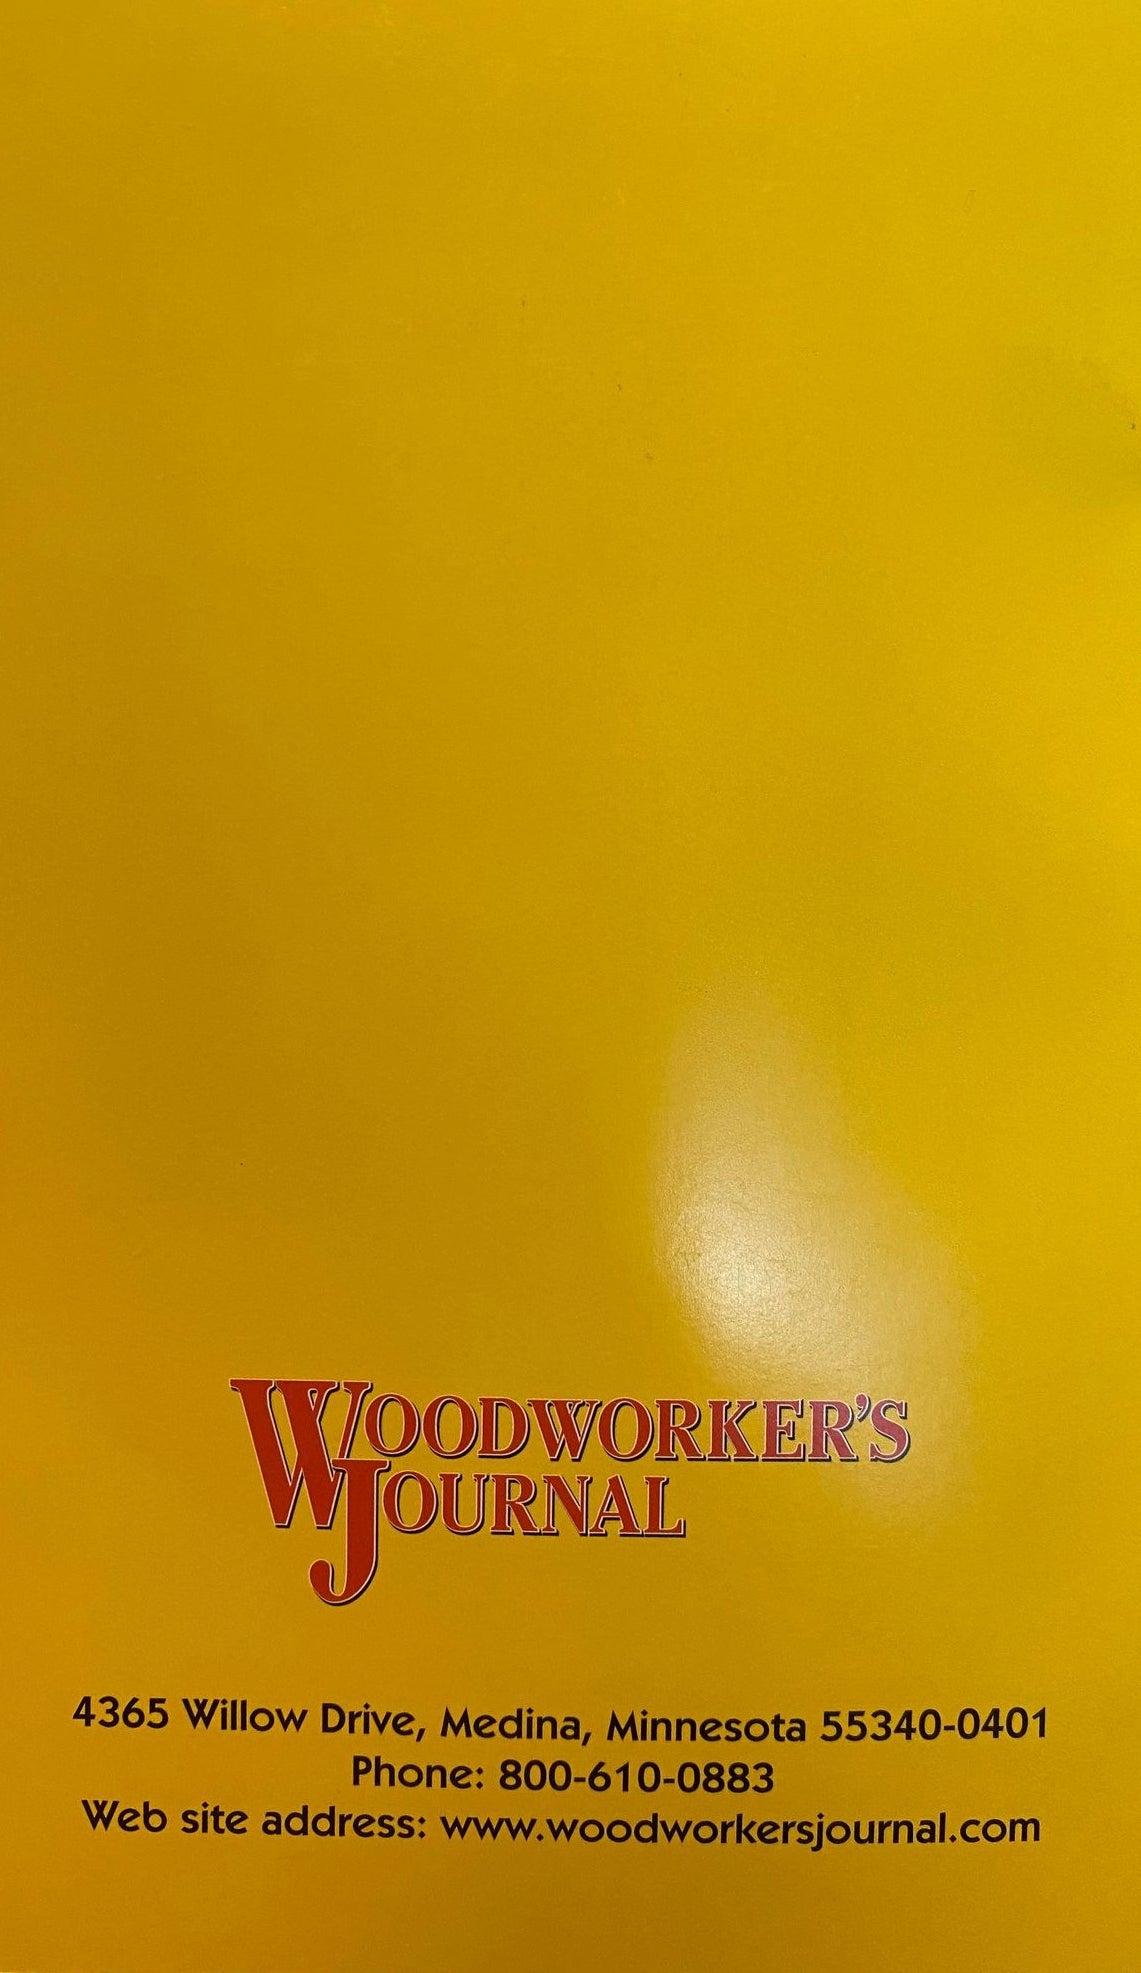 Woodworkers' Rules of Thumb Volume 1